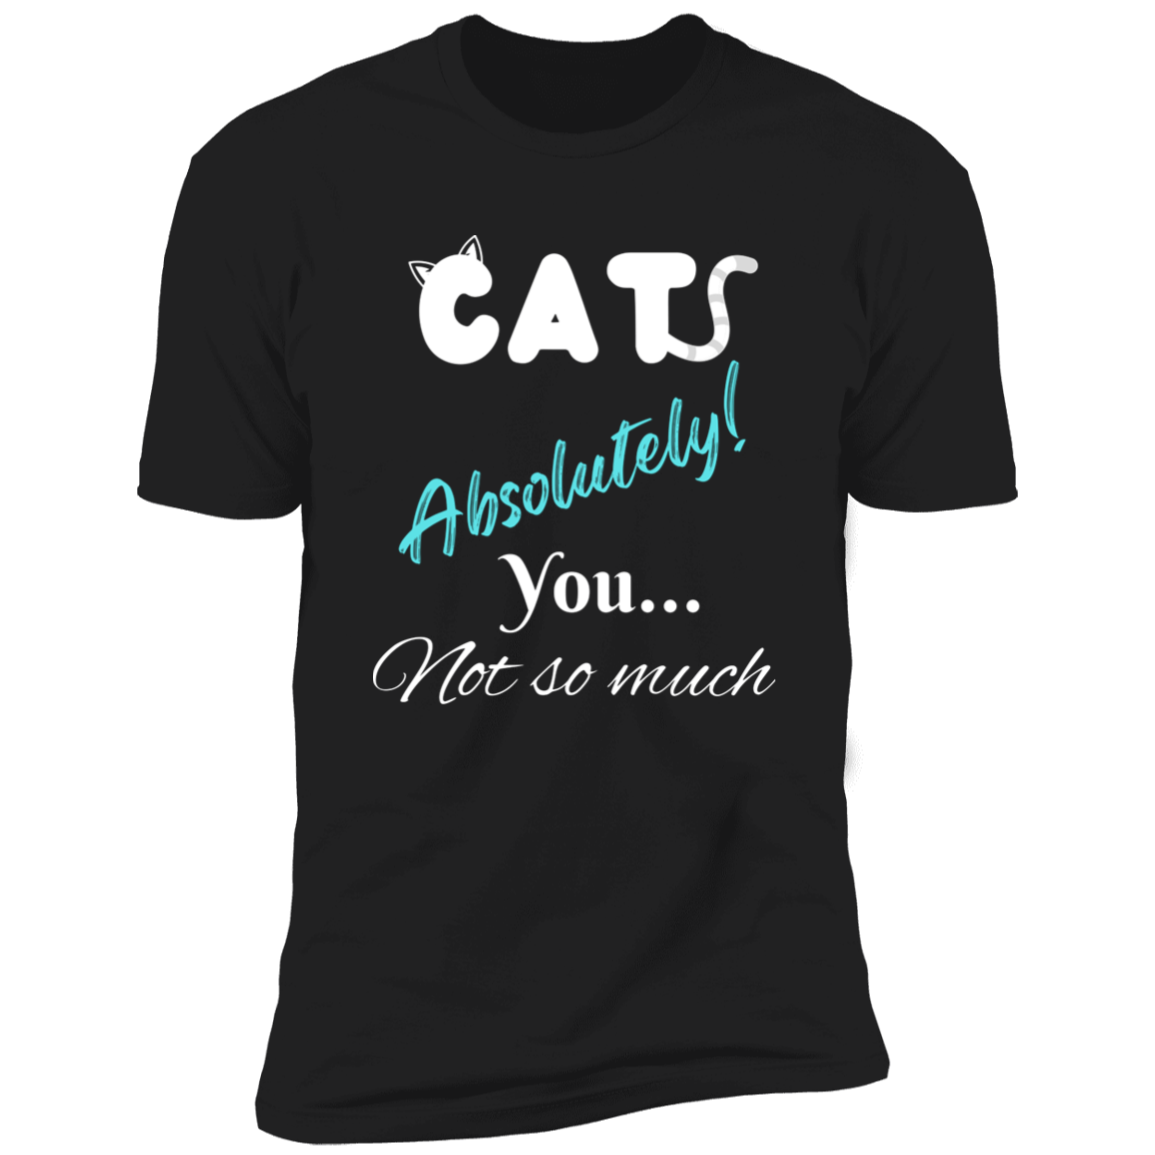 Cats Absolutely You Not So Much T-shirt, Cat Shirt for humans , in black 